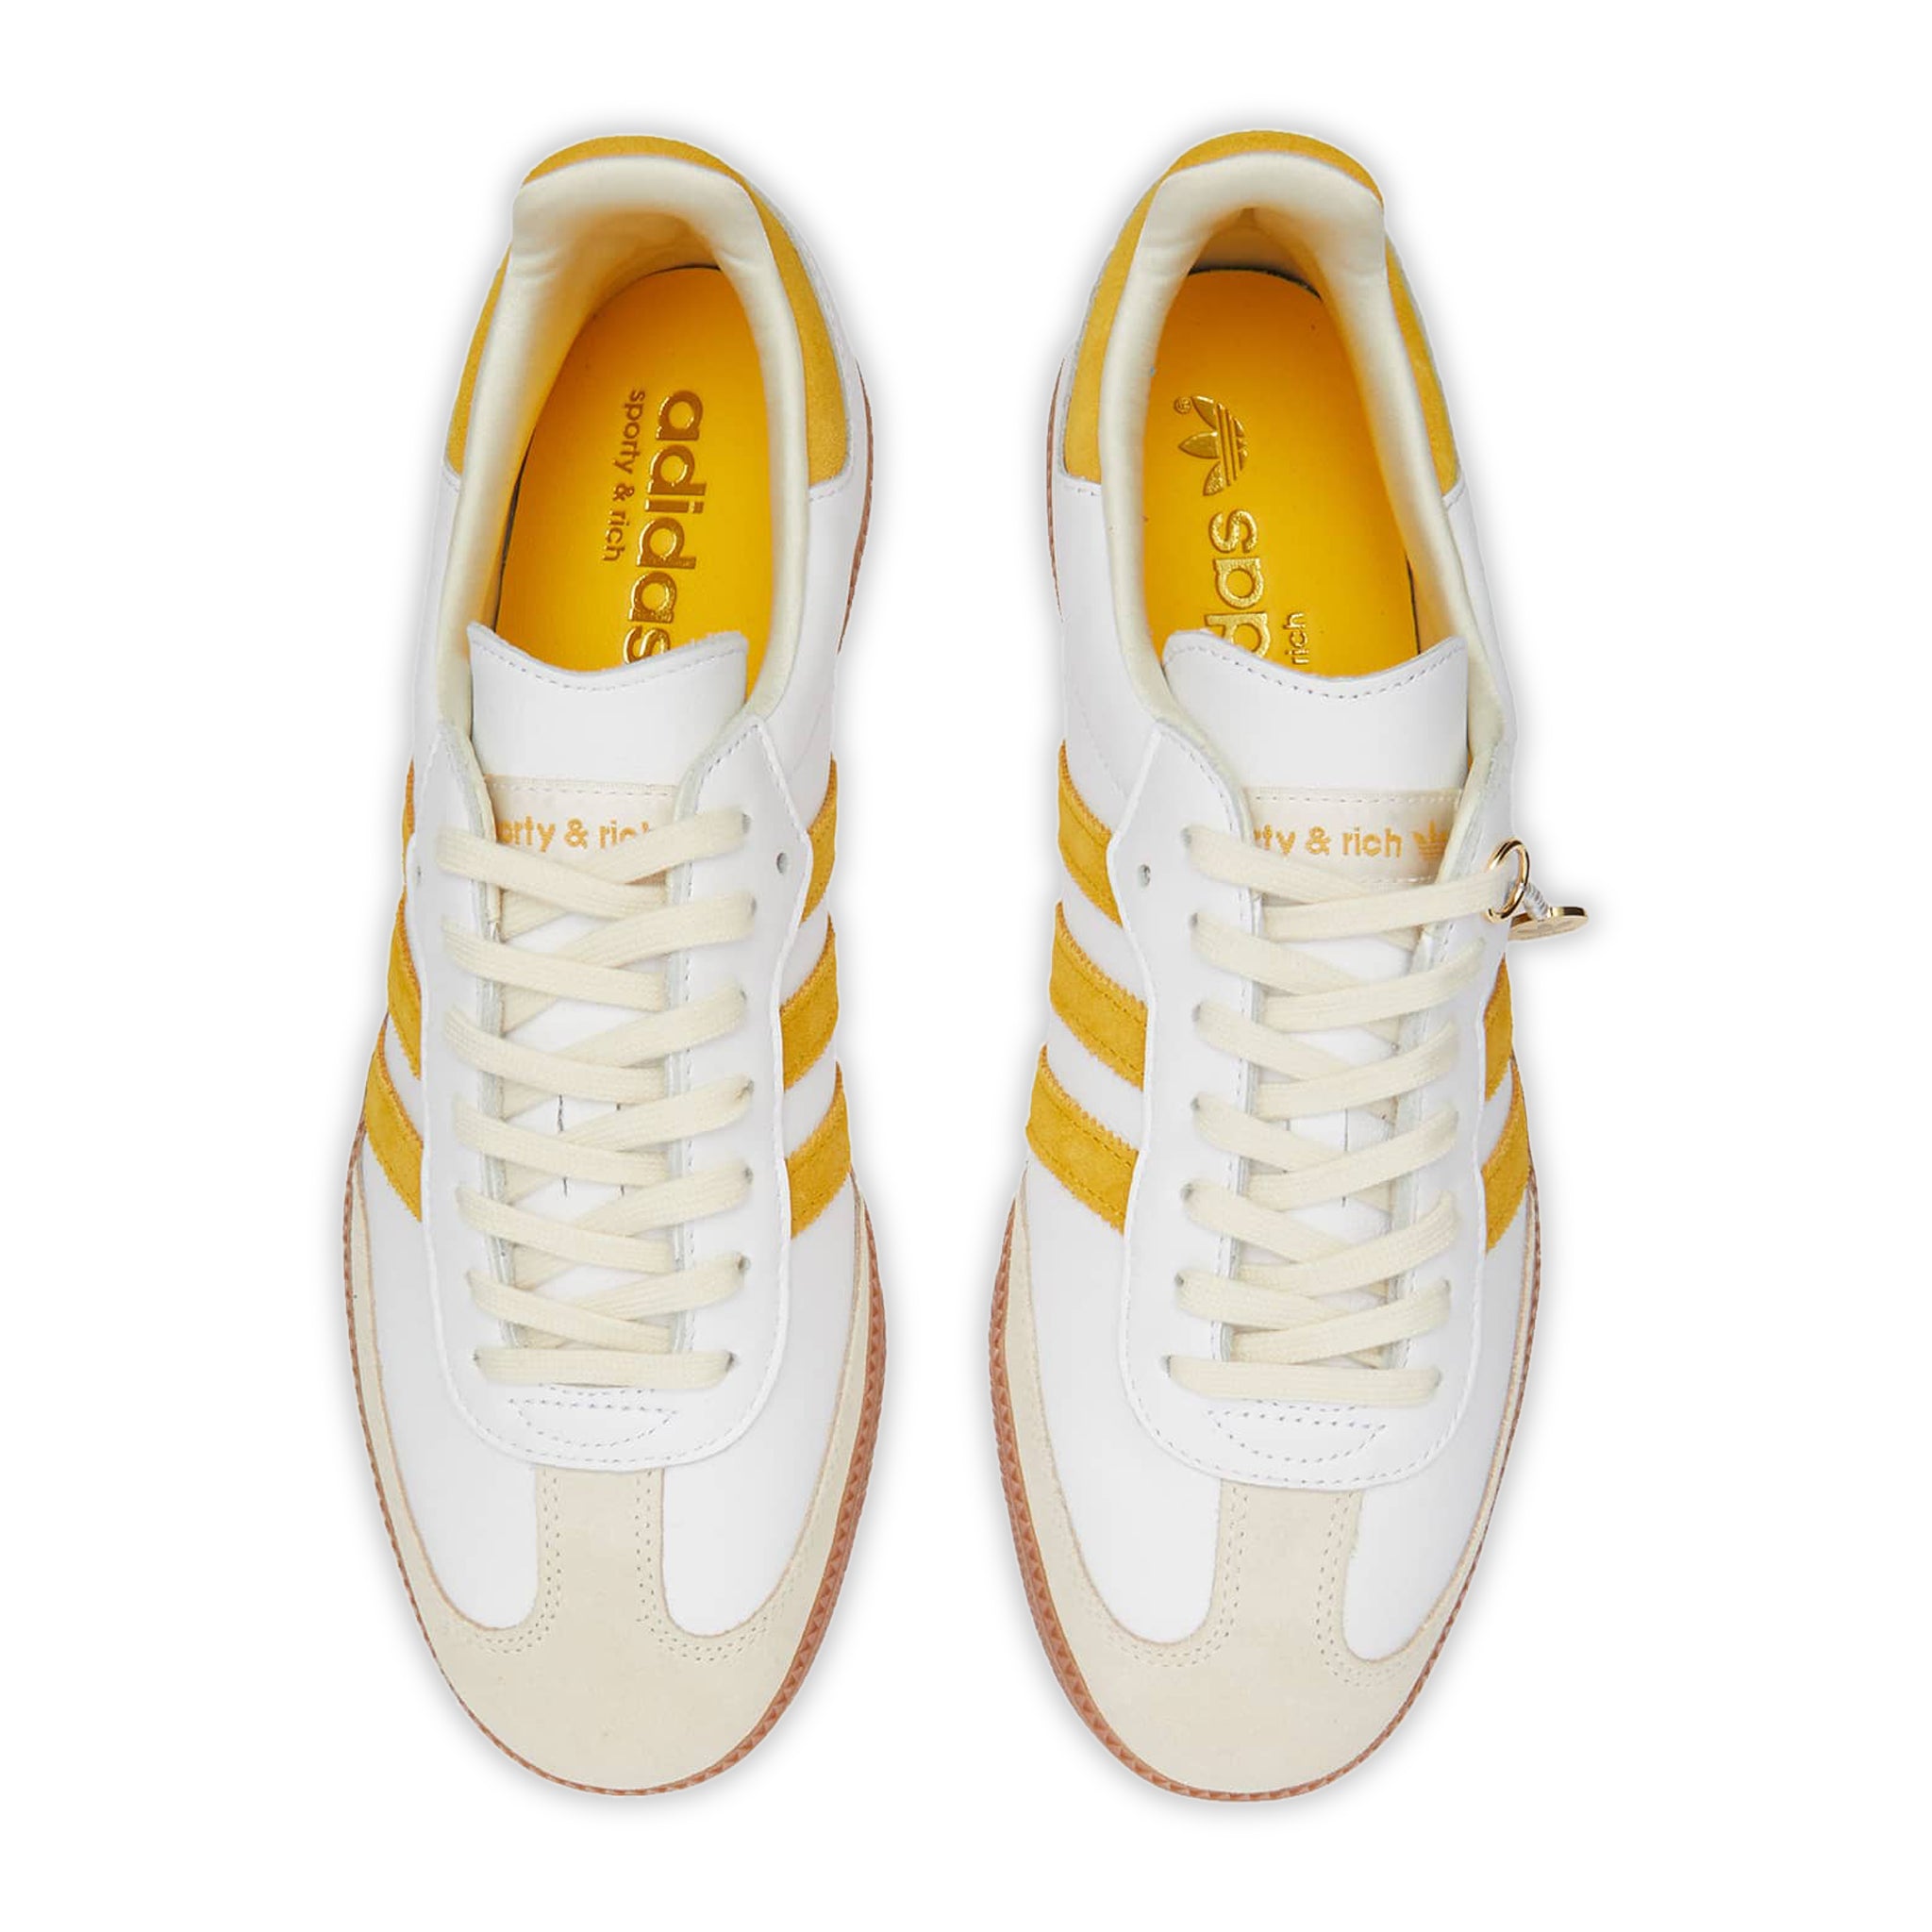 Top side view of Adidas Samba OG Sporty & Rich White Bold Gold IF5661